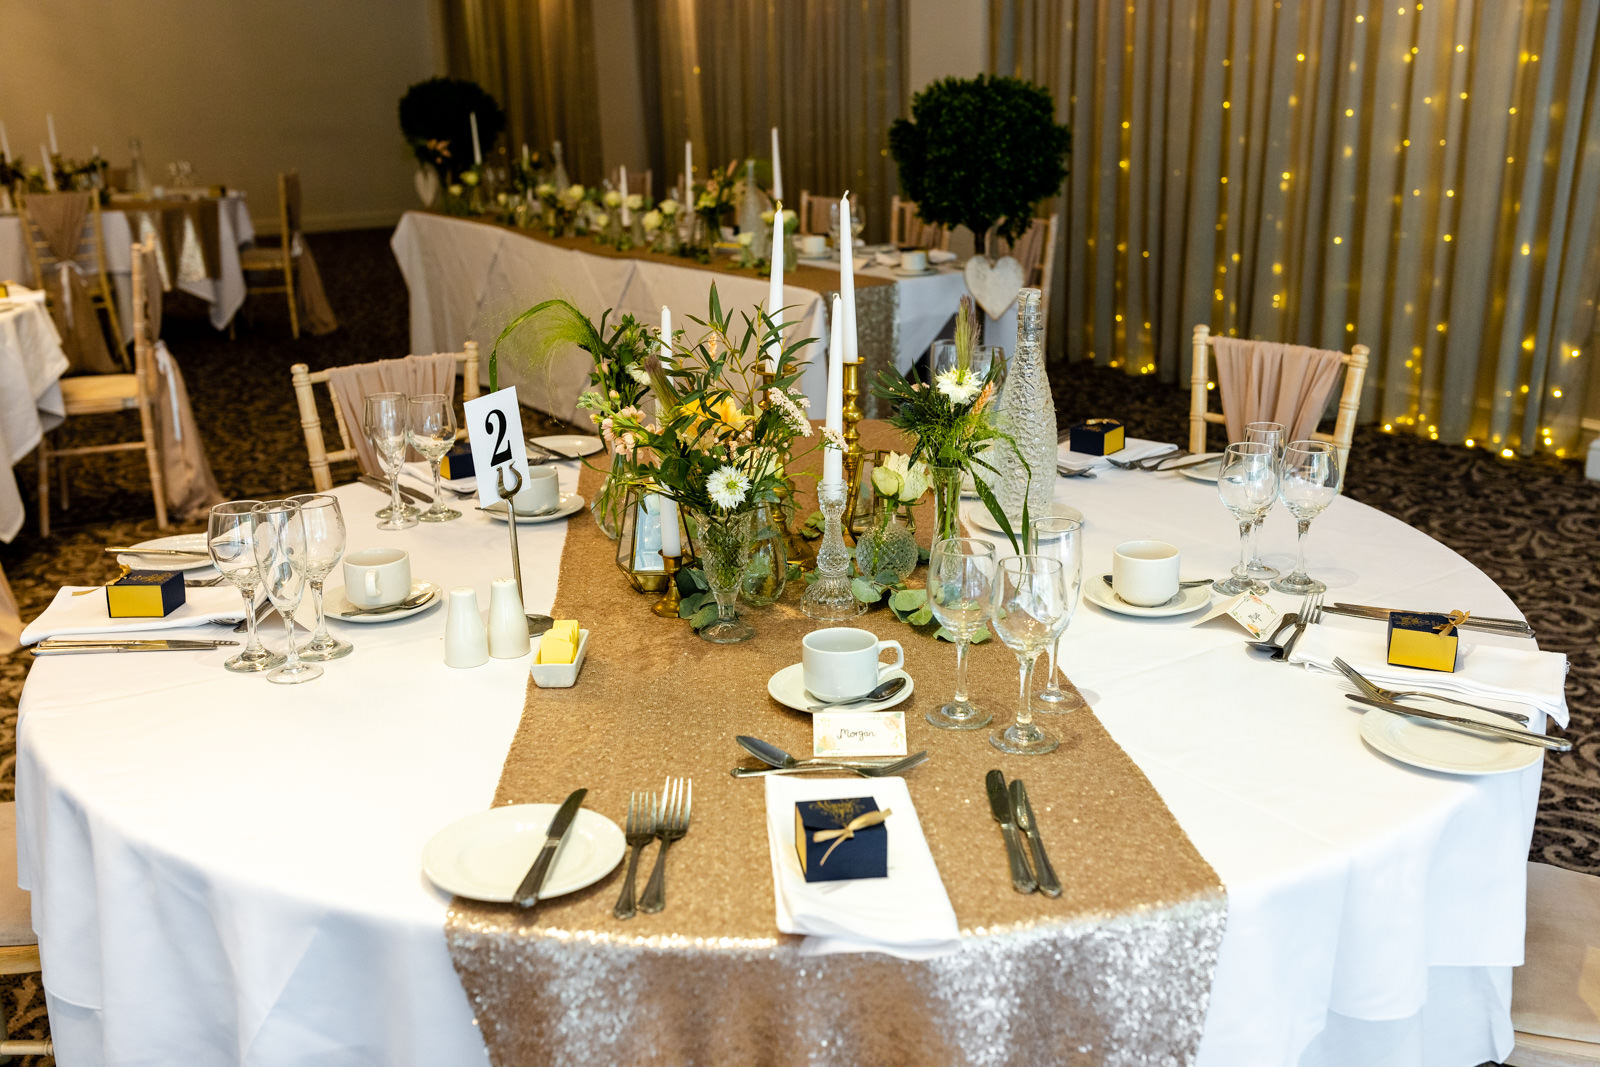 The Bear Hotel wedding table details